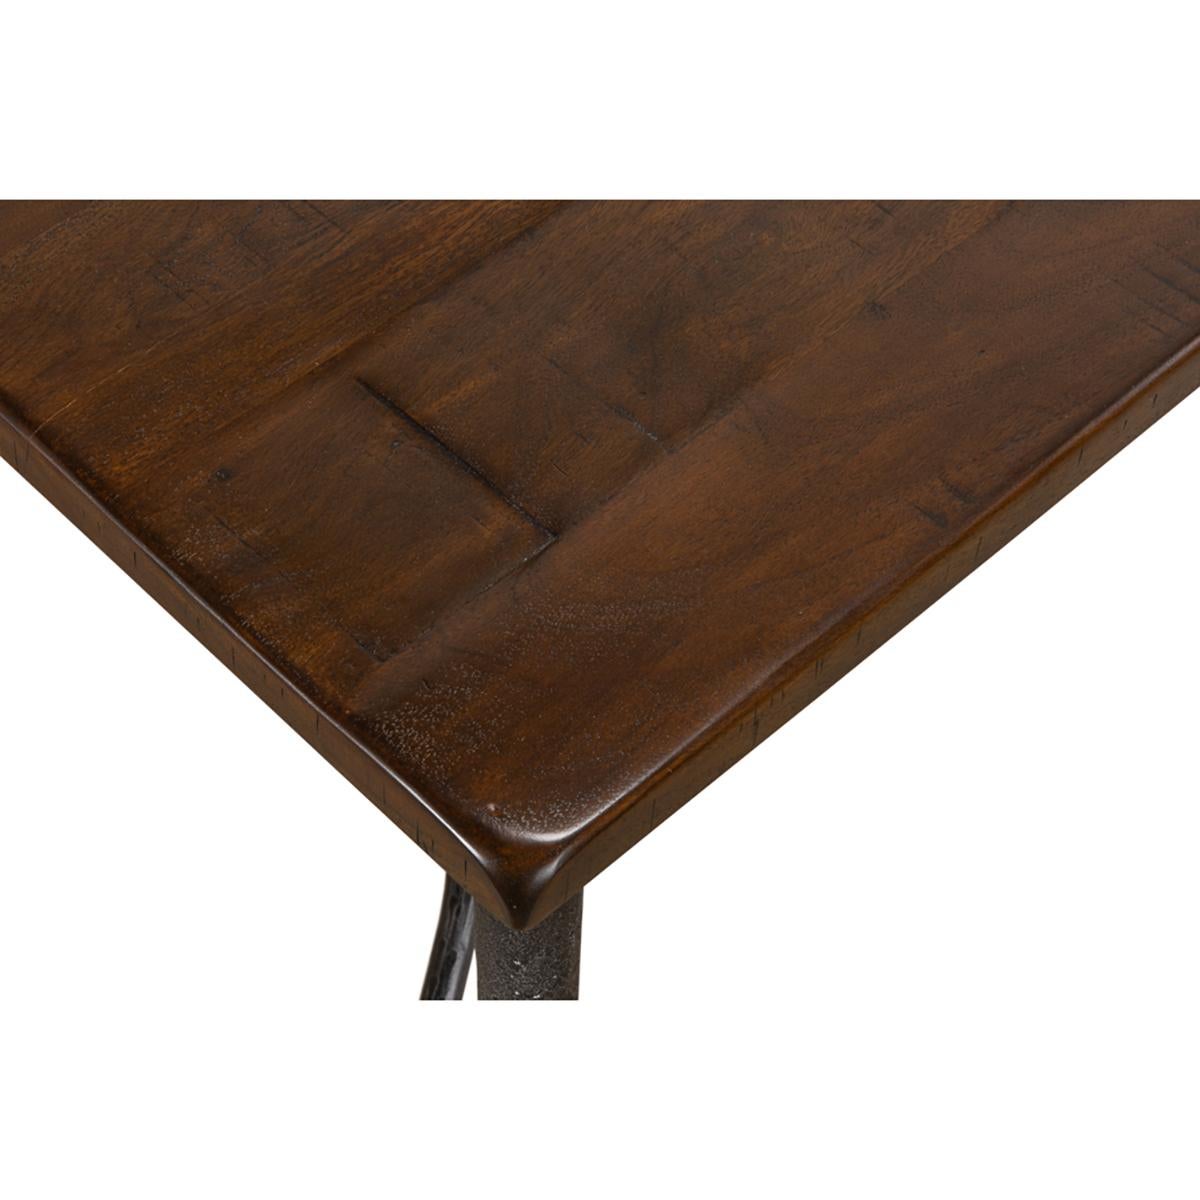 Contemporary American Industrial Coffee Table For Sale